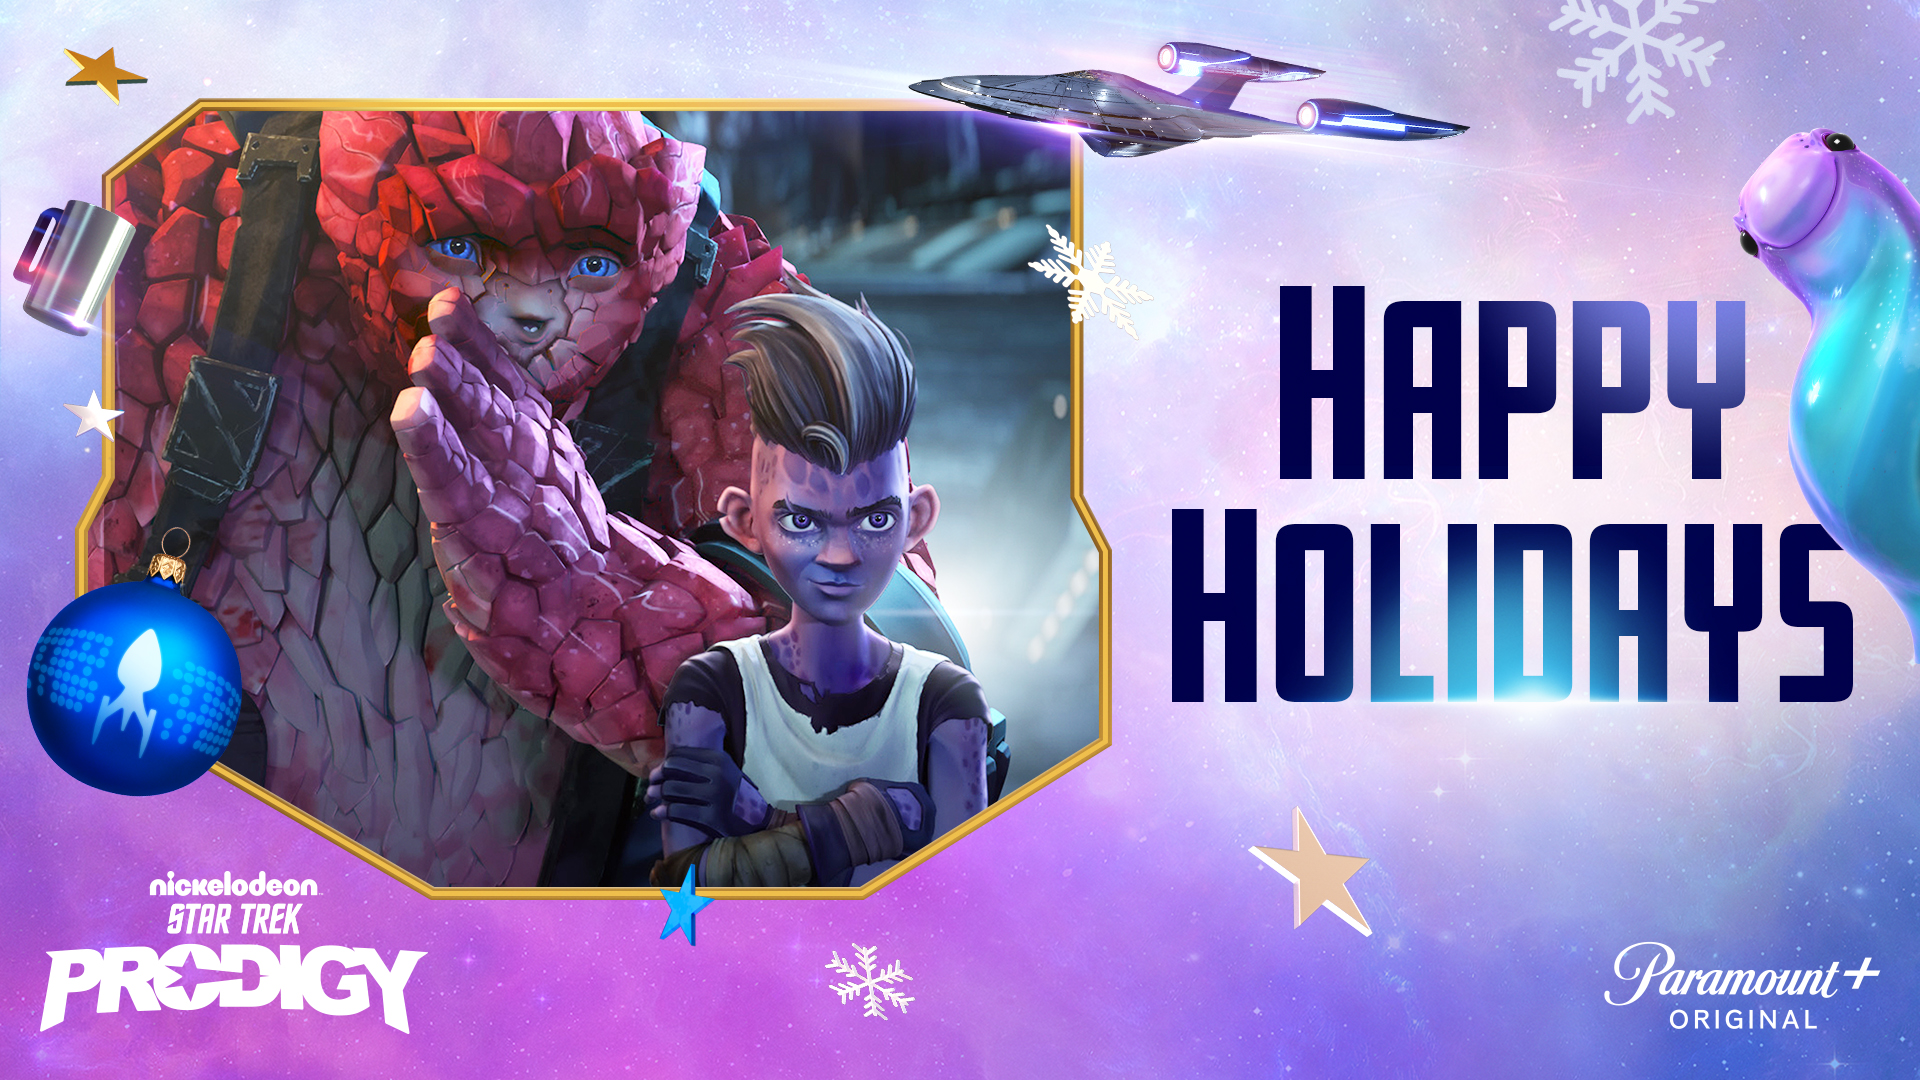 Star Trek: Prodigy Happy Holidays themed HD desktop wallpaper featuring animated characters from the TV show, with festive decorations and a space motif.